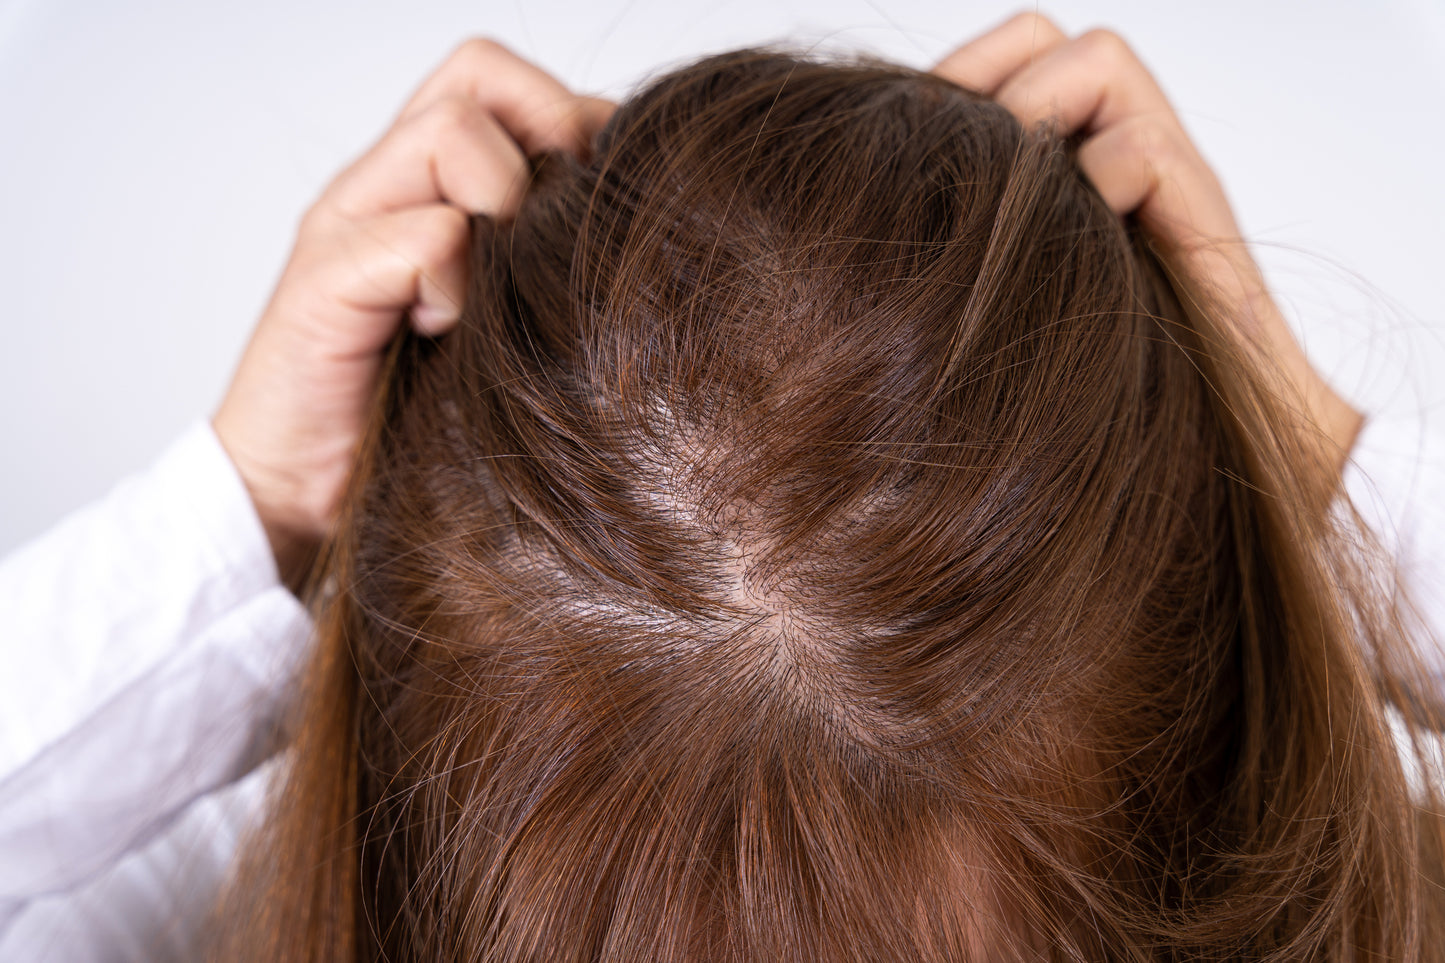 How a Dry Scalp Can Lead to Hair Loss